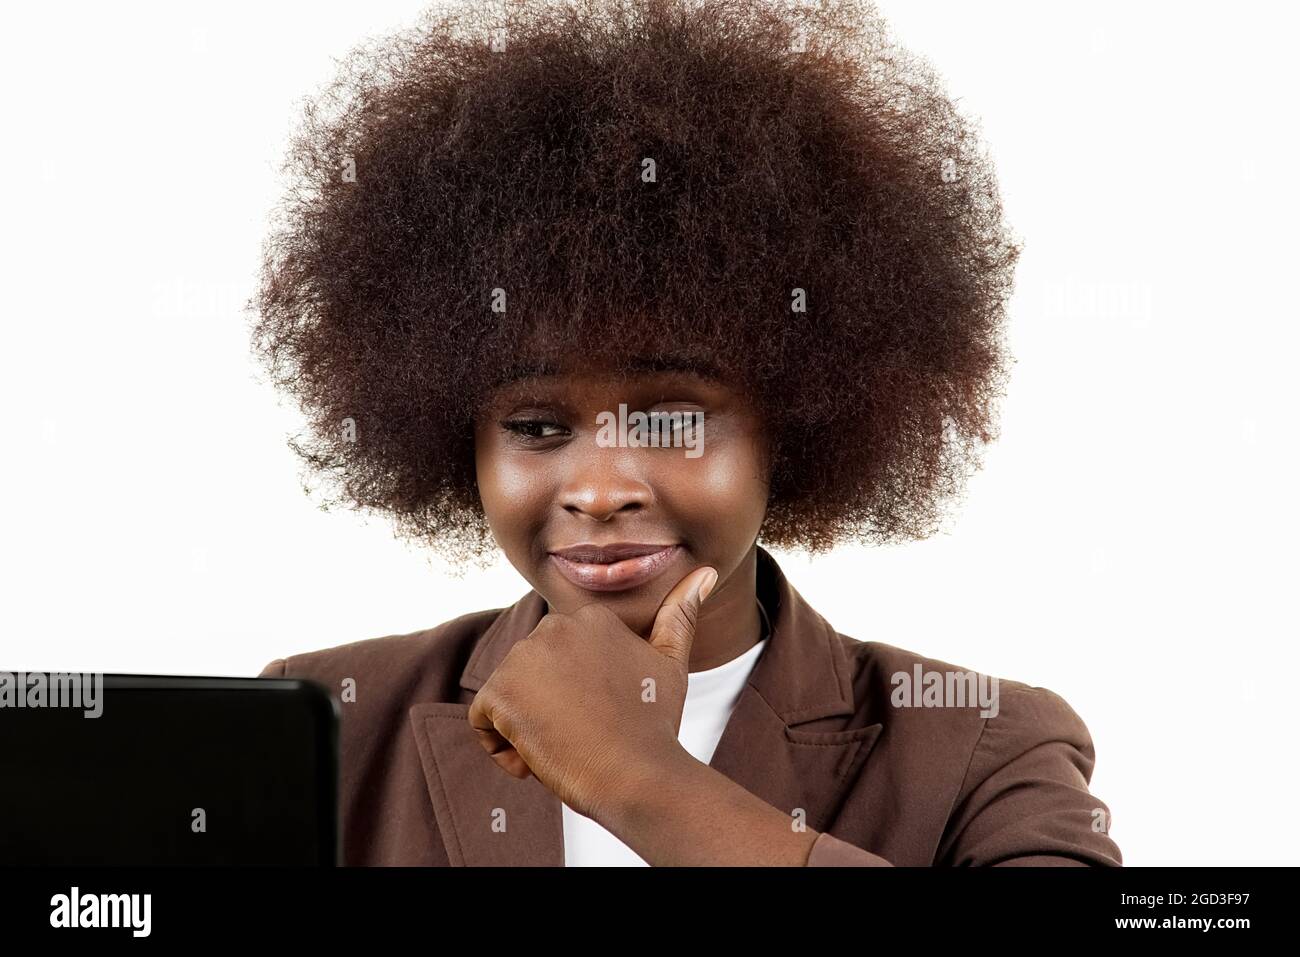 Young black woman Hispanic Latino business executive, with afro hair, with gesture of interest looking at a laptop, in white background Stock Photo